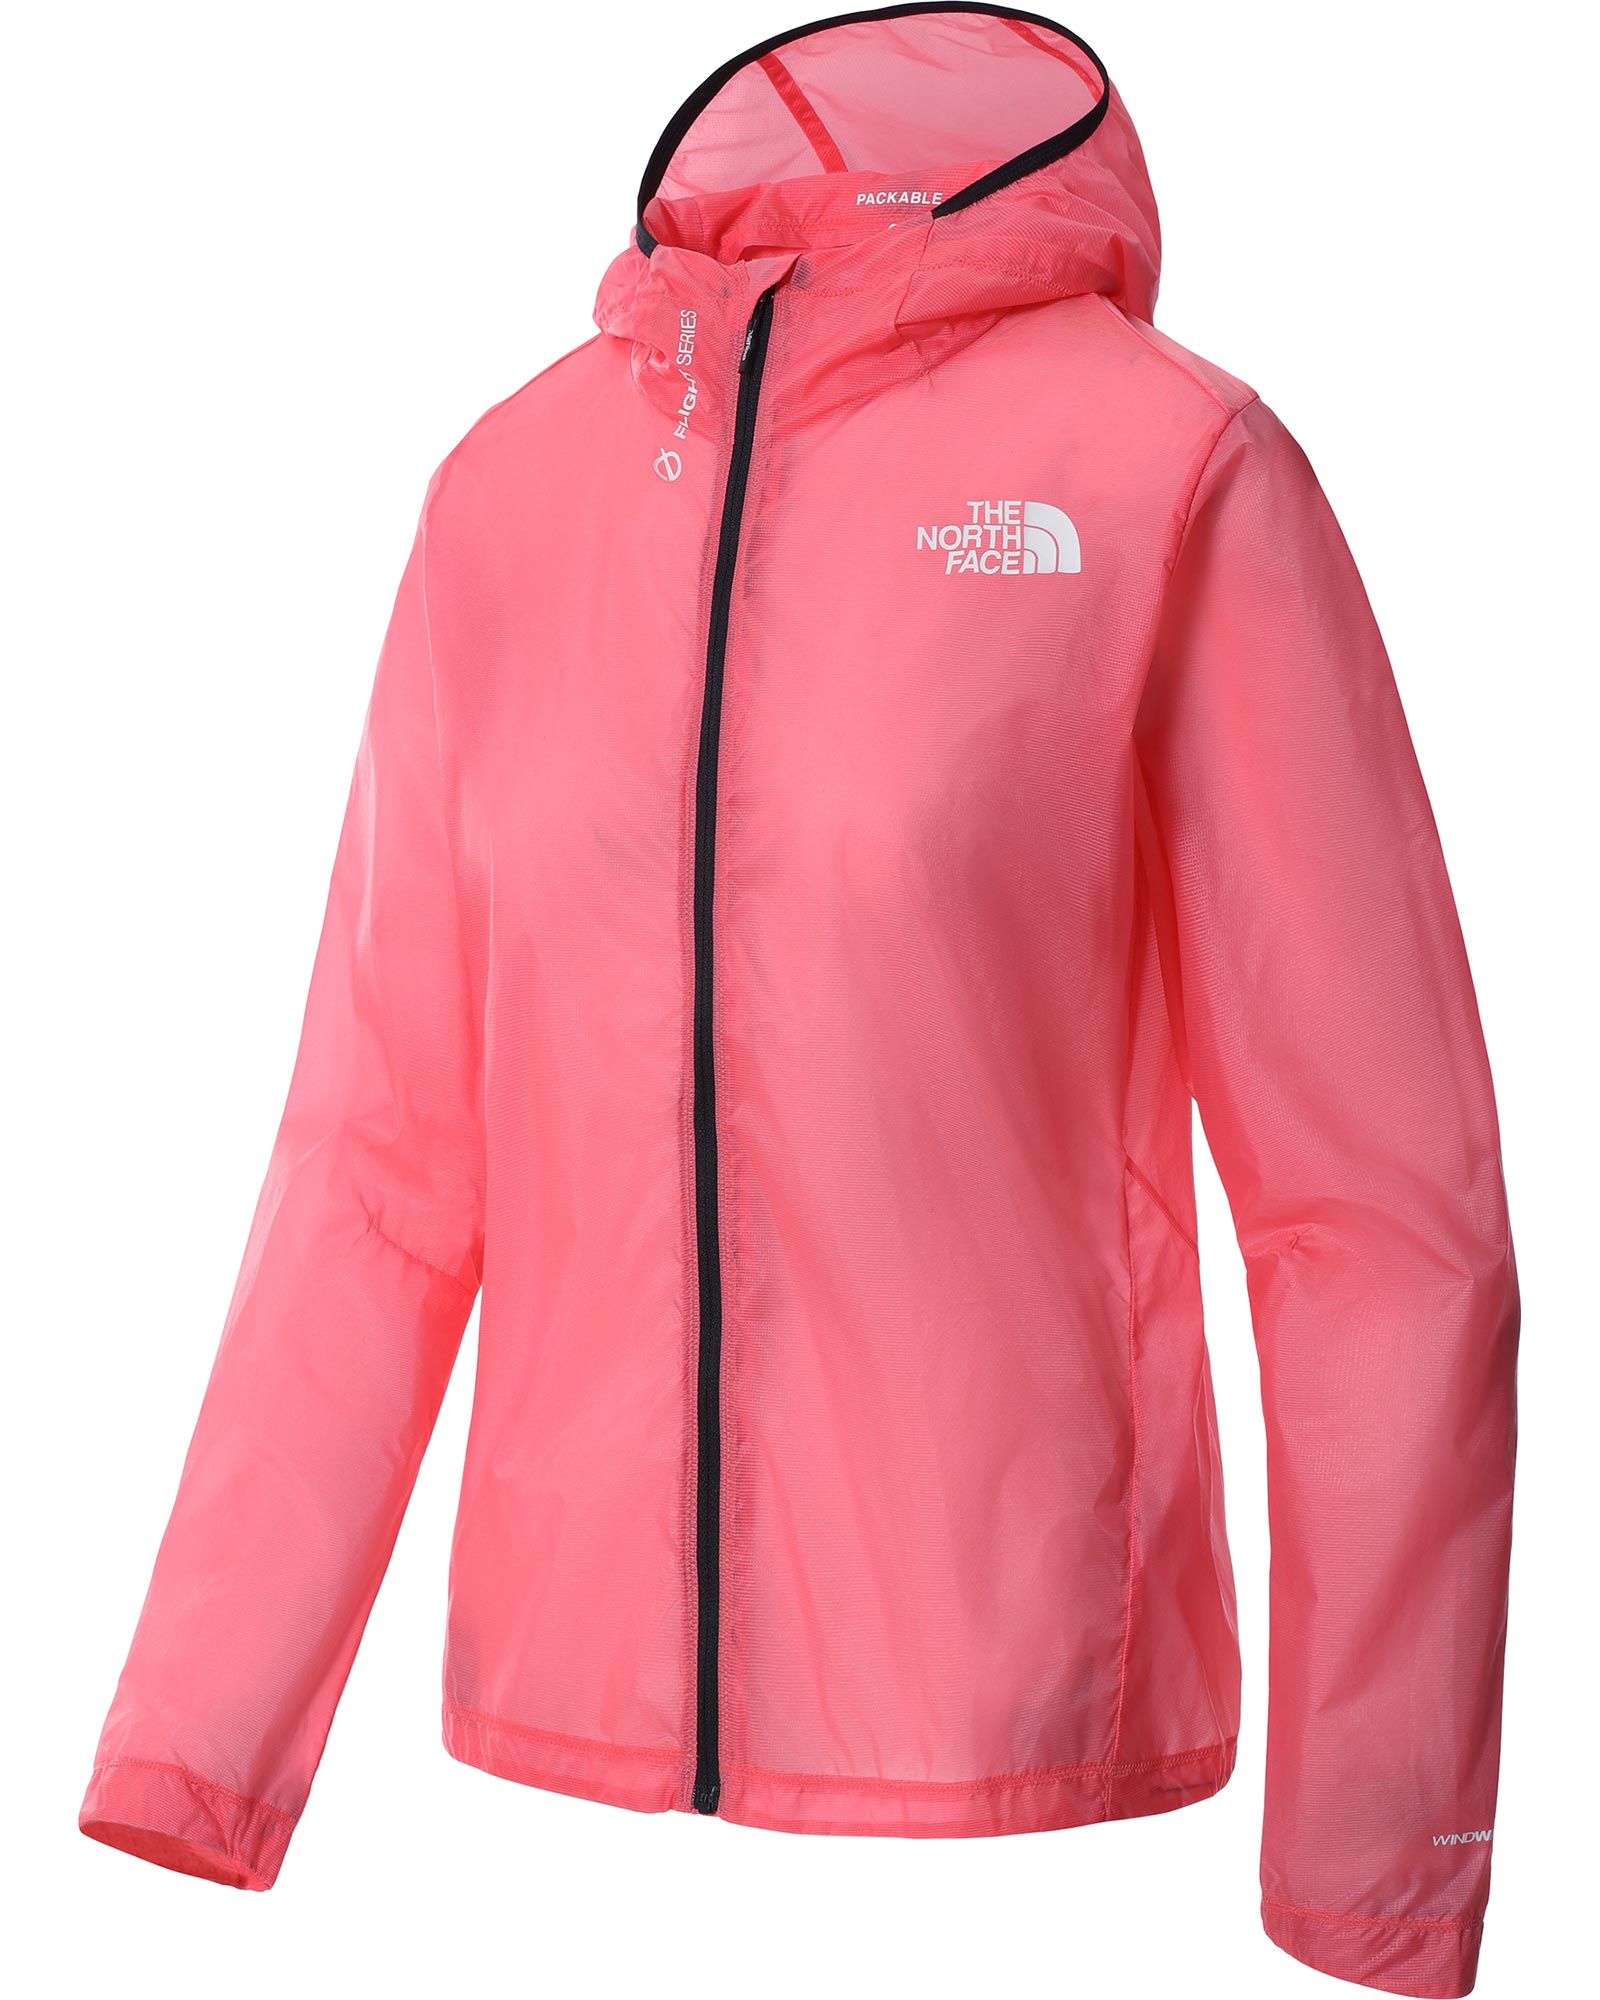 The North Face Flight Lightriser Women’s Wind Jacket - Calypso Coral XS